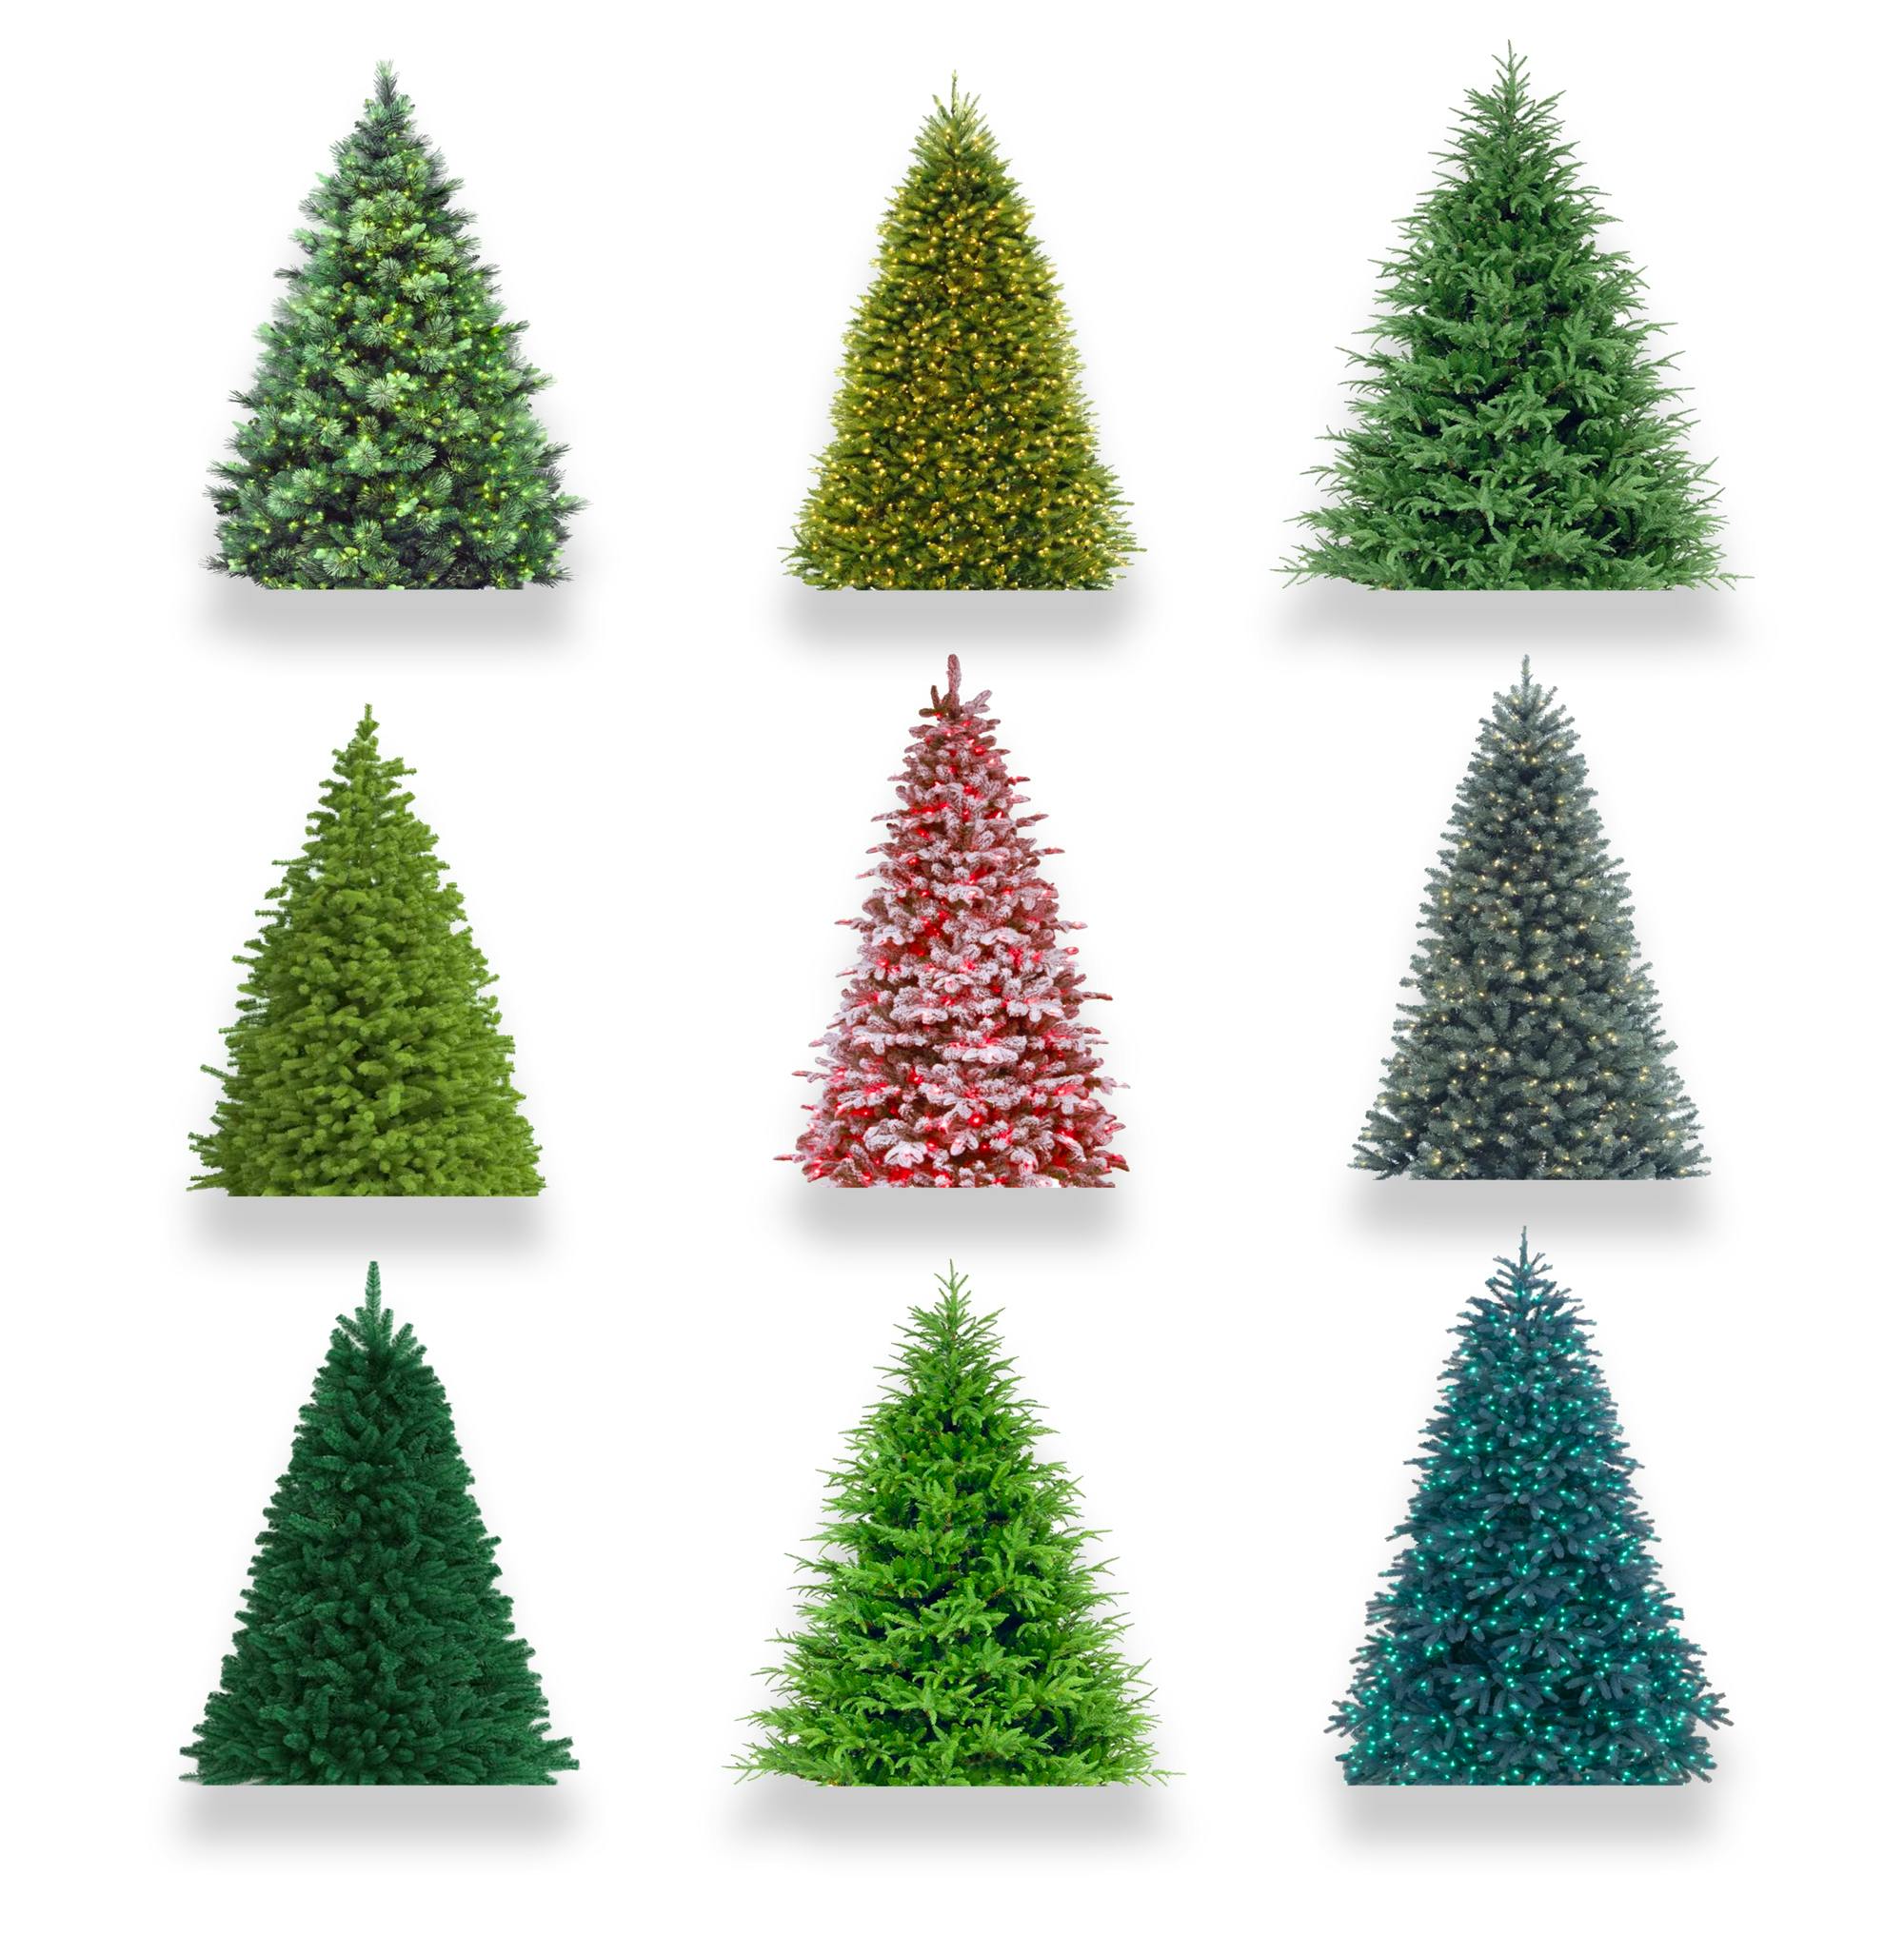 How to Find the Perfect Artificial Christmas Tree